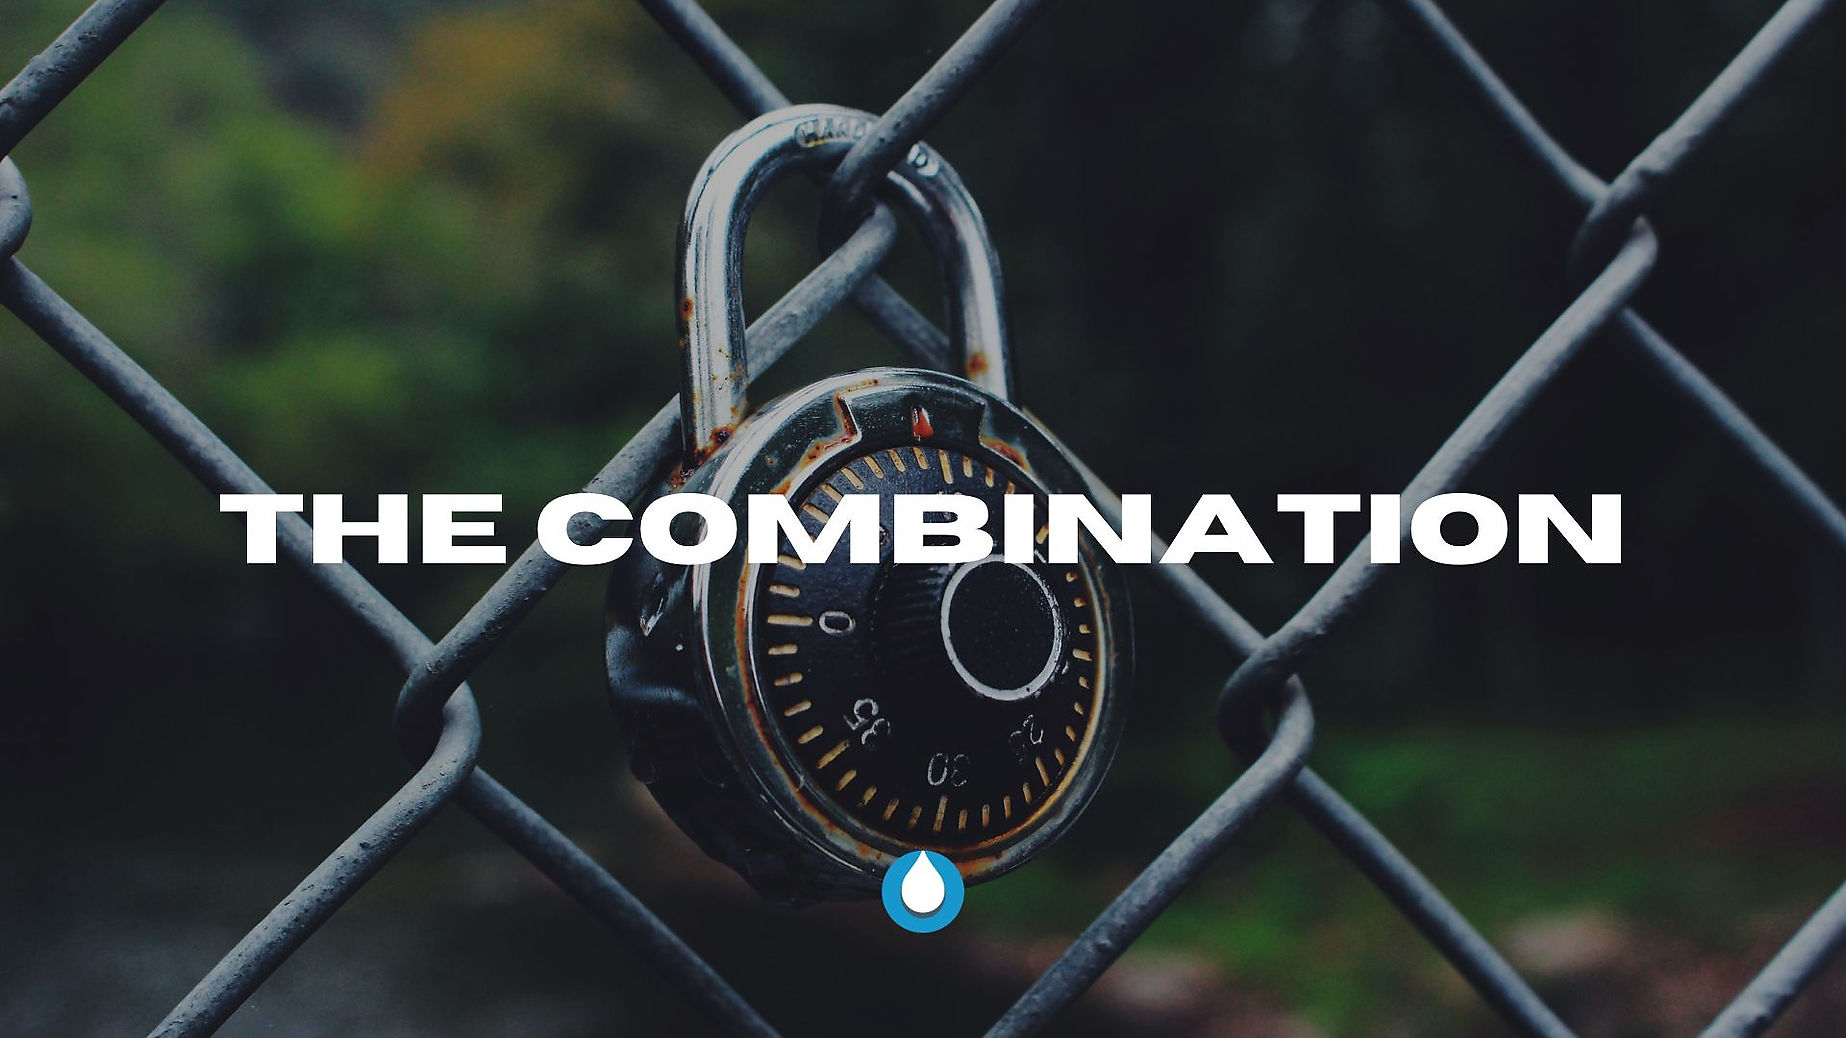 THE COMBINATION: UNLOCKING THE EFFECTIVENESS OF THE CHURCH